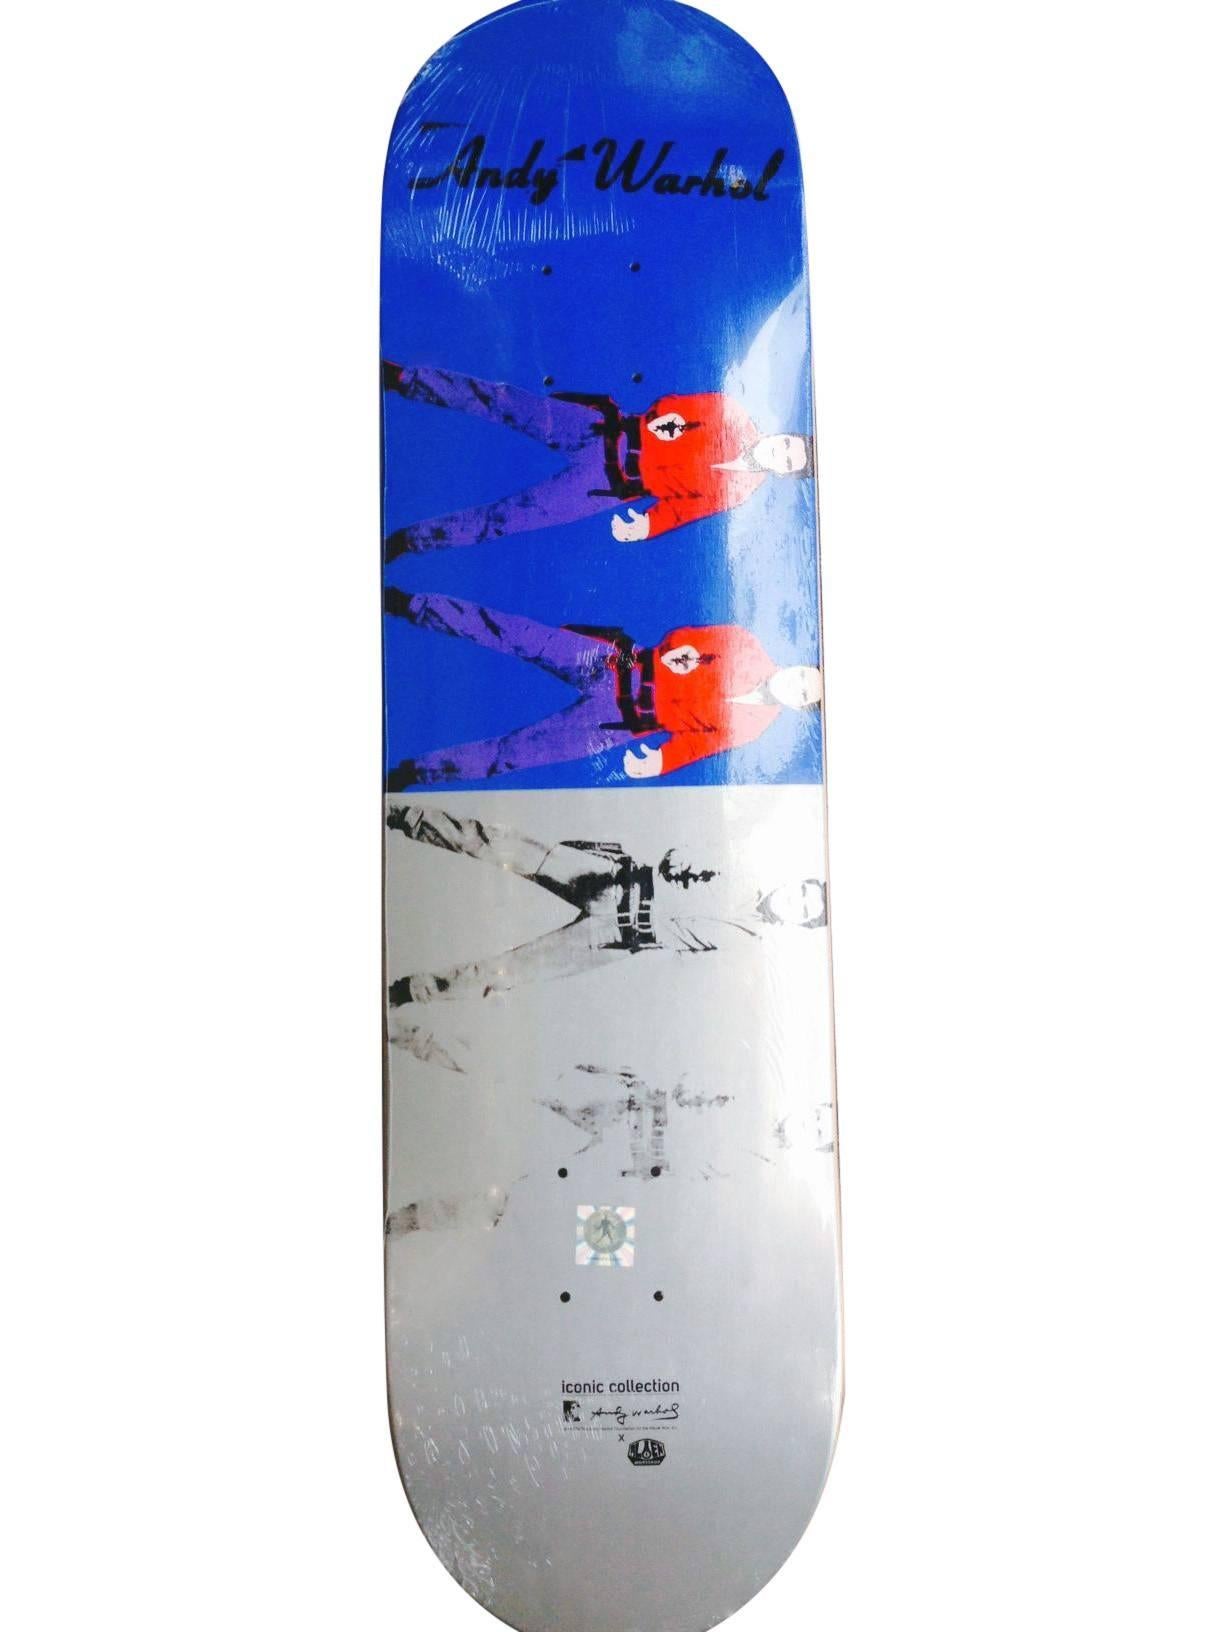 Rare Out of Print Andy Warhol ELVIS Skateboard Deck: New in its original packaging.
This work originated circa 2012 as a result of the collaboration between Alien Workshop and the Andy Warhol Foundation. A brilliant piece of pop art that makes for